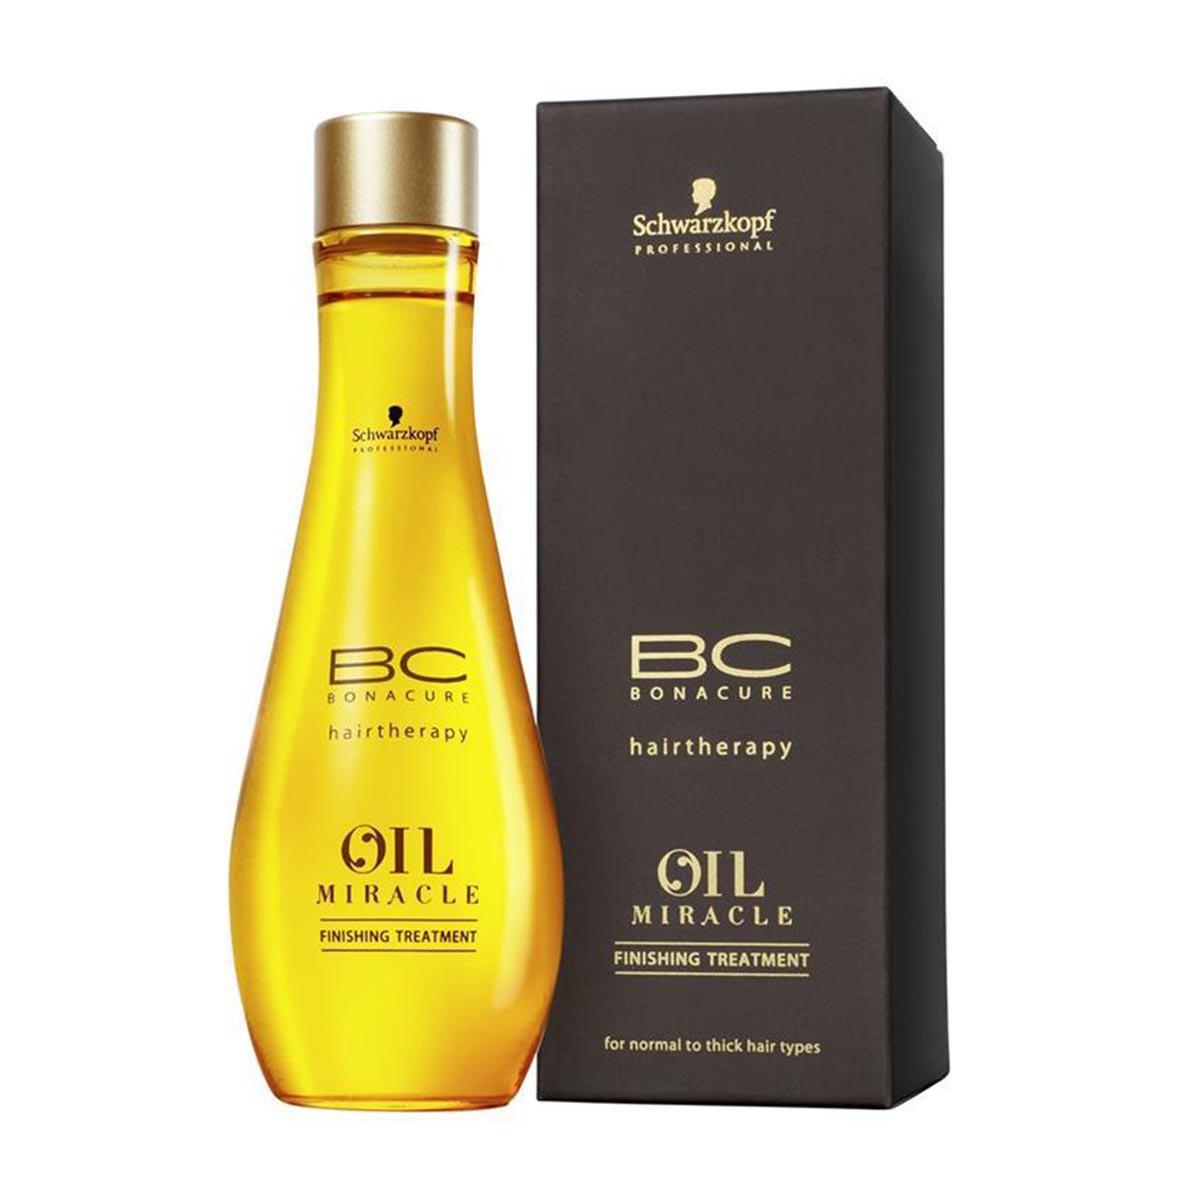 schwarzkopf-bonacure-hairtherapy-oil-miracle-finishing-treatment-for-normal-to-thick-hair-100ml